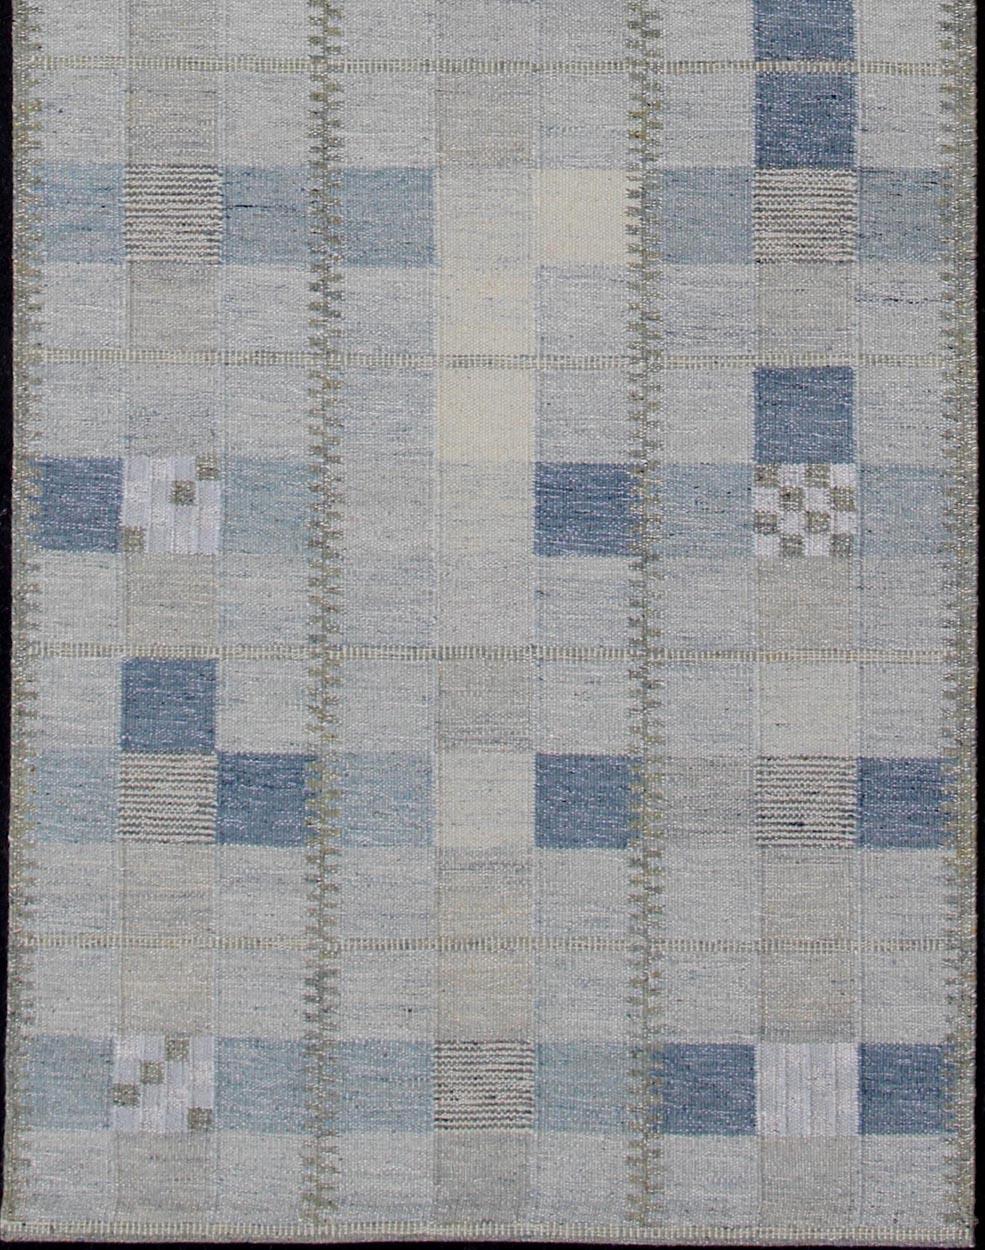 Large Gallery Runner Scandinavian flat-weave with modern design, rug rjk-18841-shb-137-01, country of origin / type: India / Scandinavian flat-weave.

This Scandinavian flat-weave is inspired by the work of Swedish textile designers of the early to